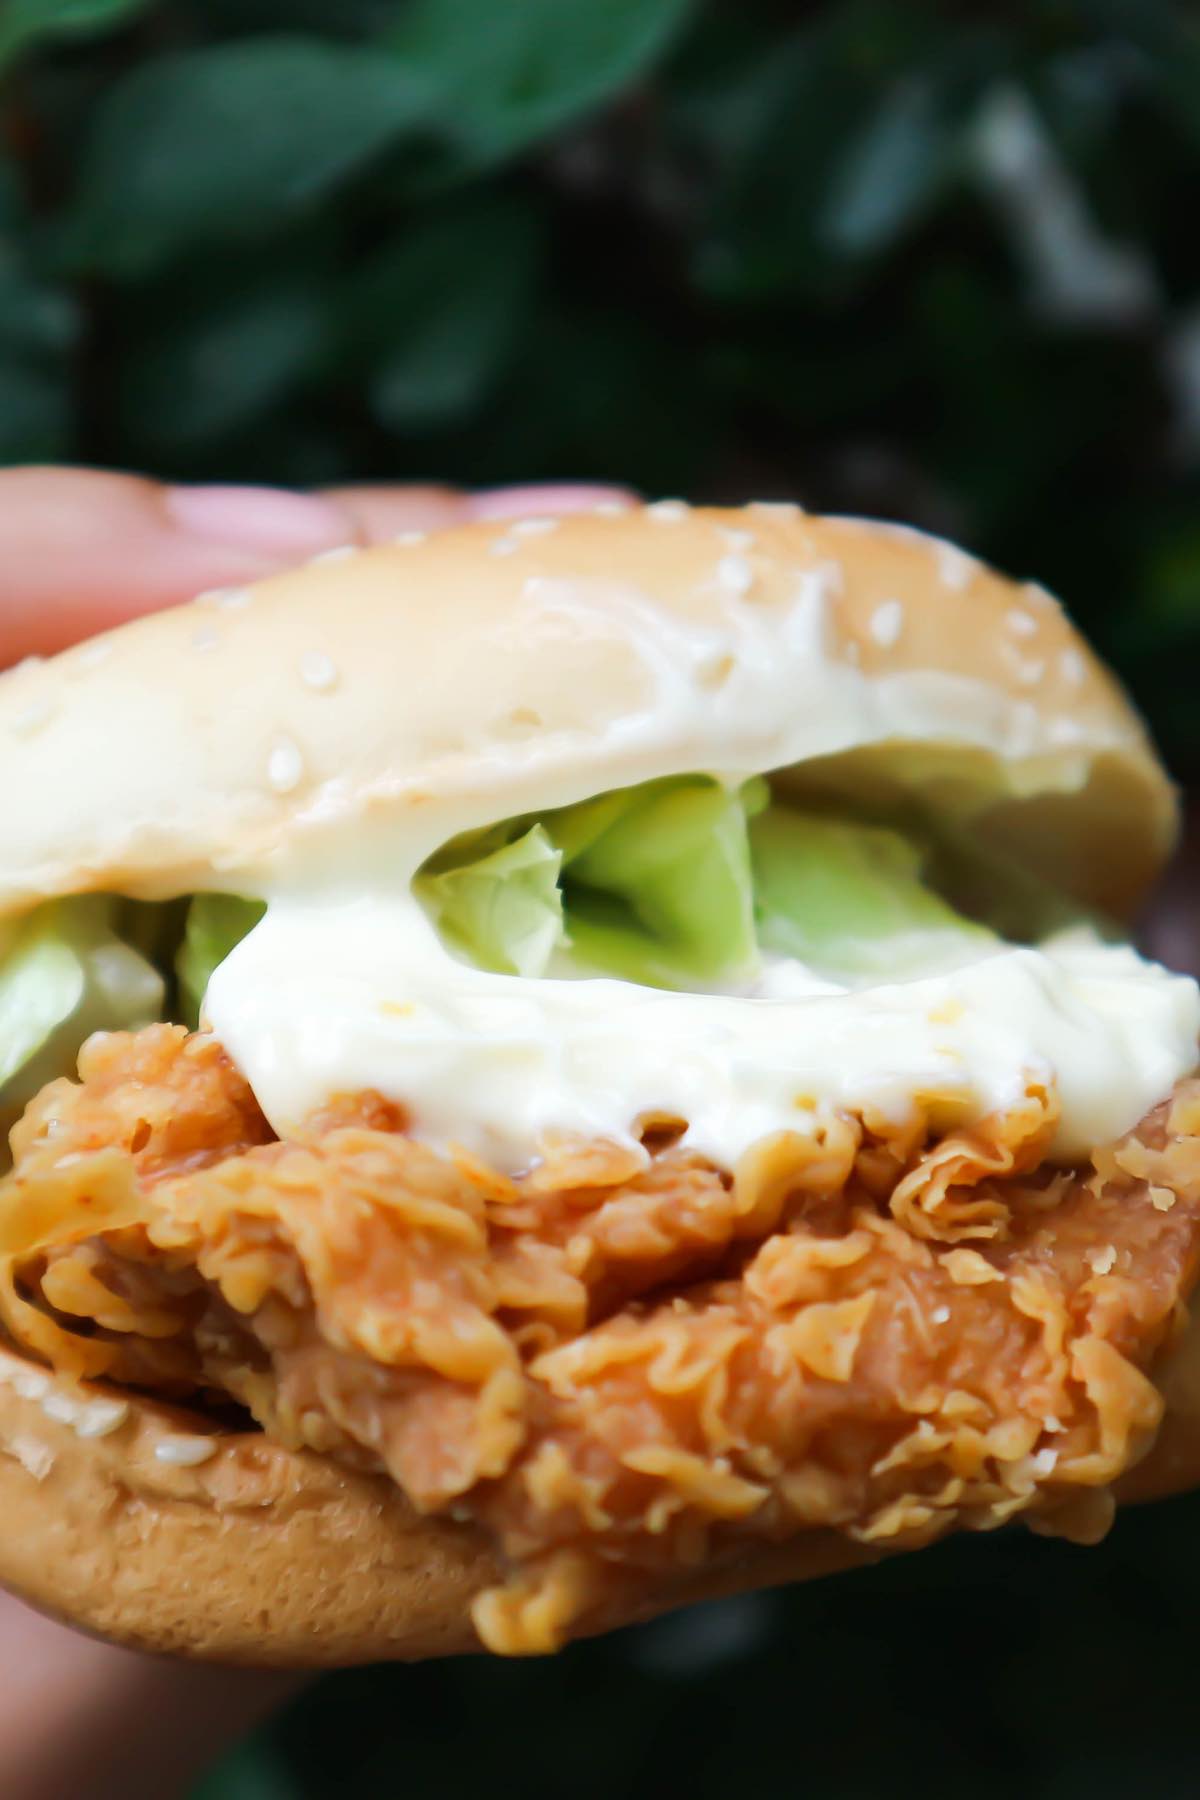 KFC Zinger Burger or Chicken Burger is the perfect fried chicken sandwich with an added “Zing!” for lovers of a little extra heat. Crispy chicken thighs are balanced by a creamy burger sauce, placed on a toasted brioche bun. This copycat recipe is going to be your most requested meal.